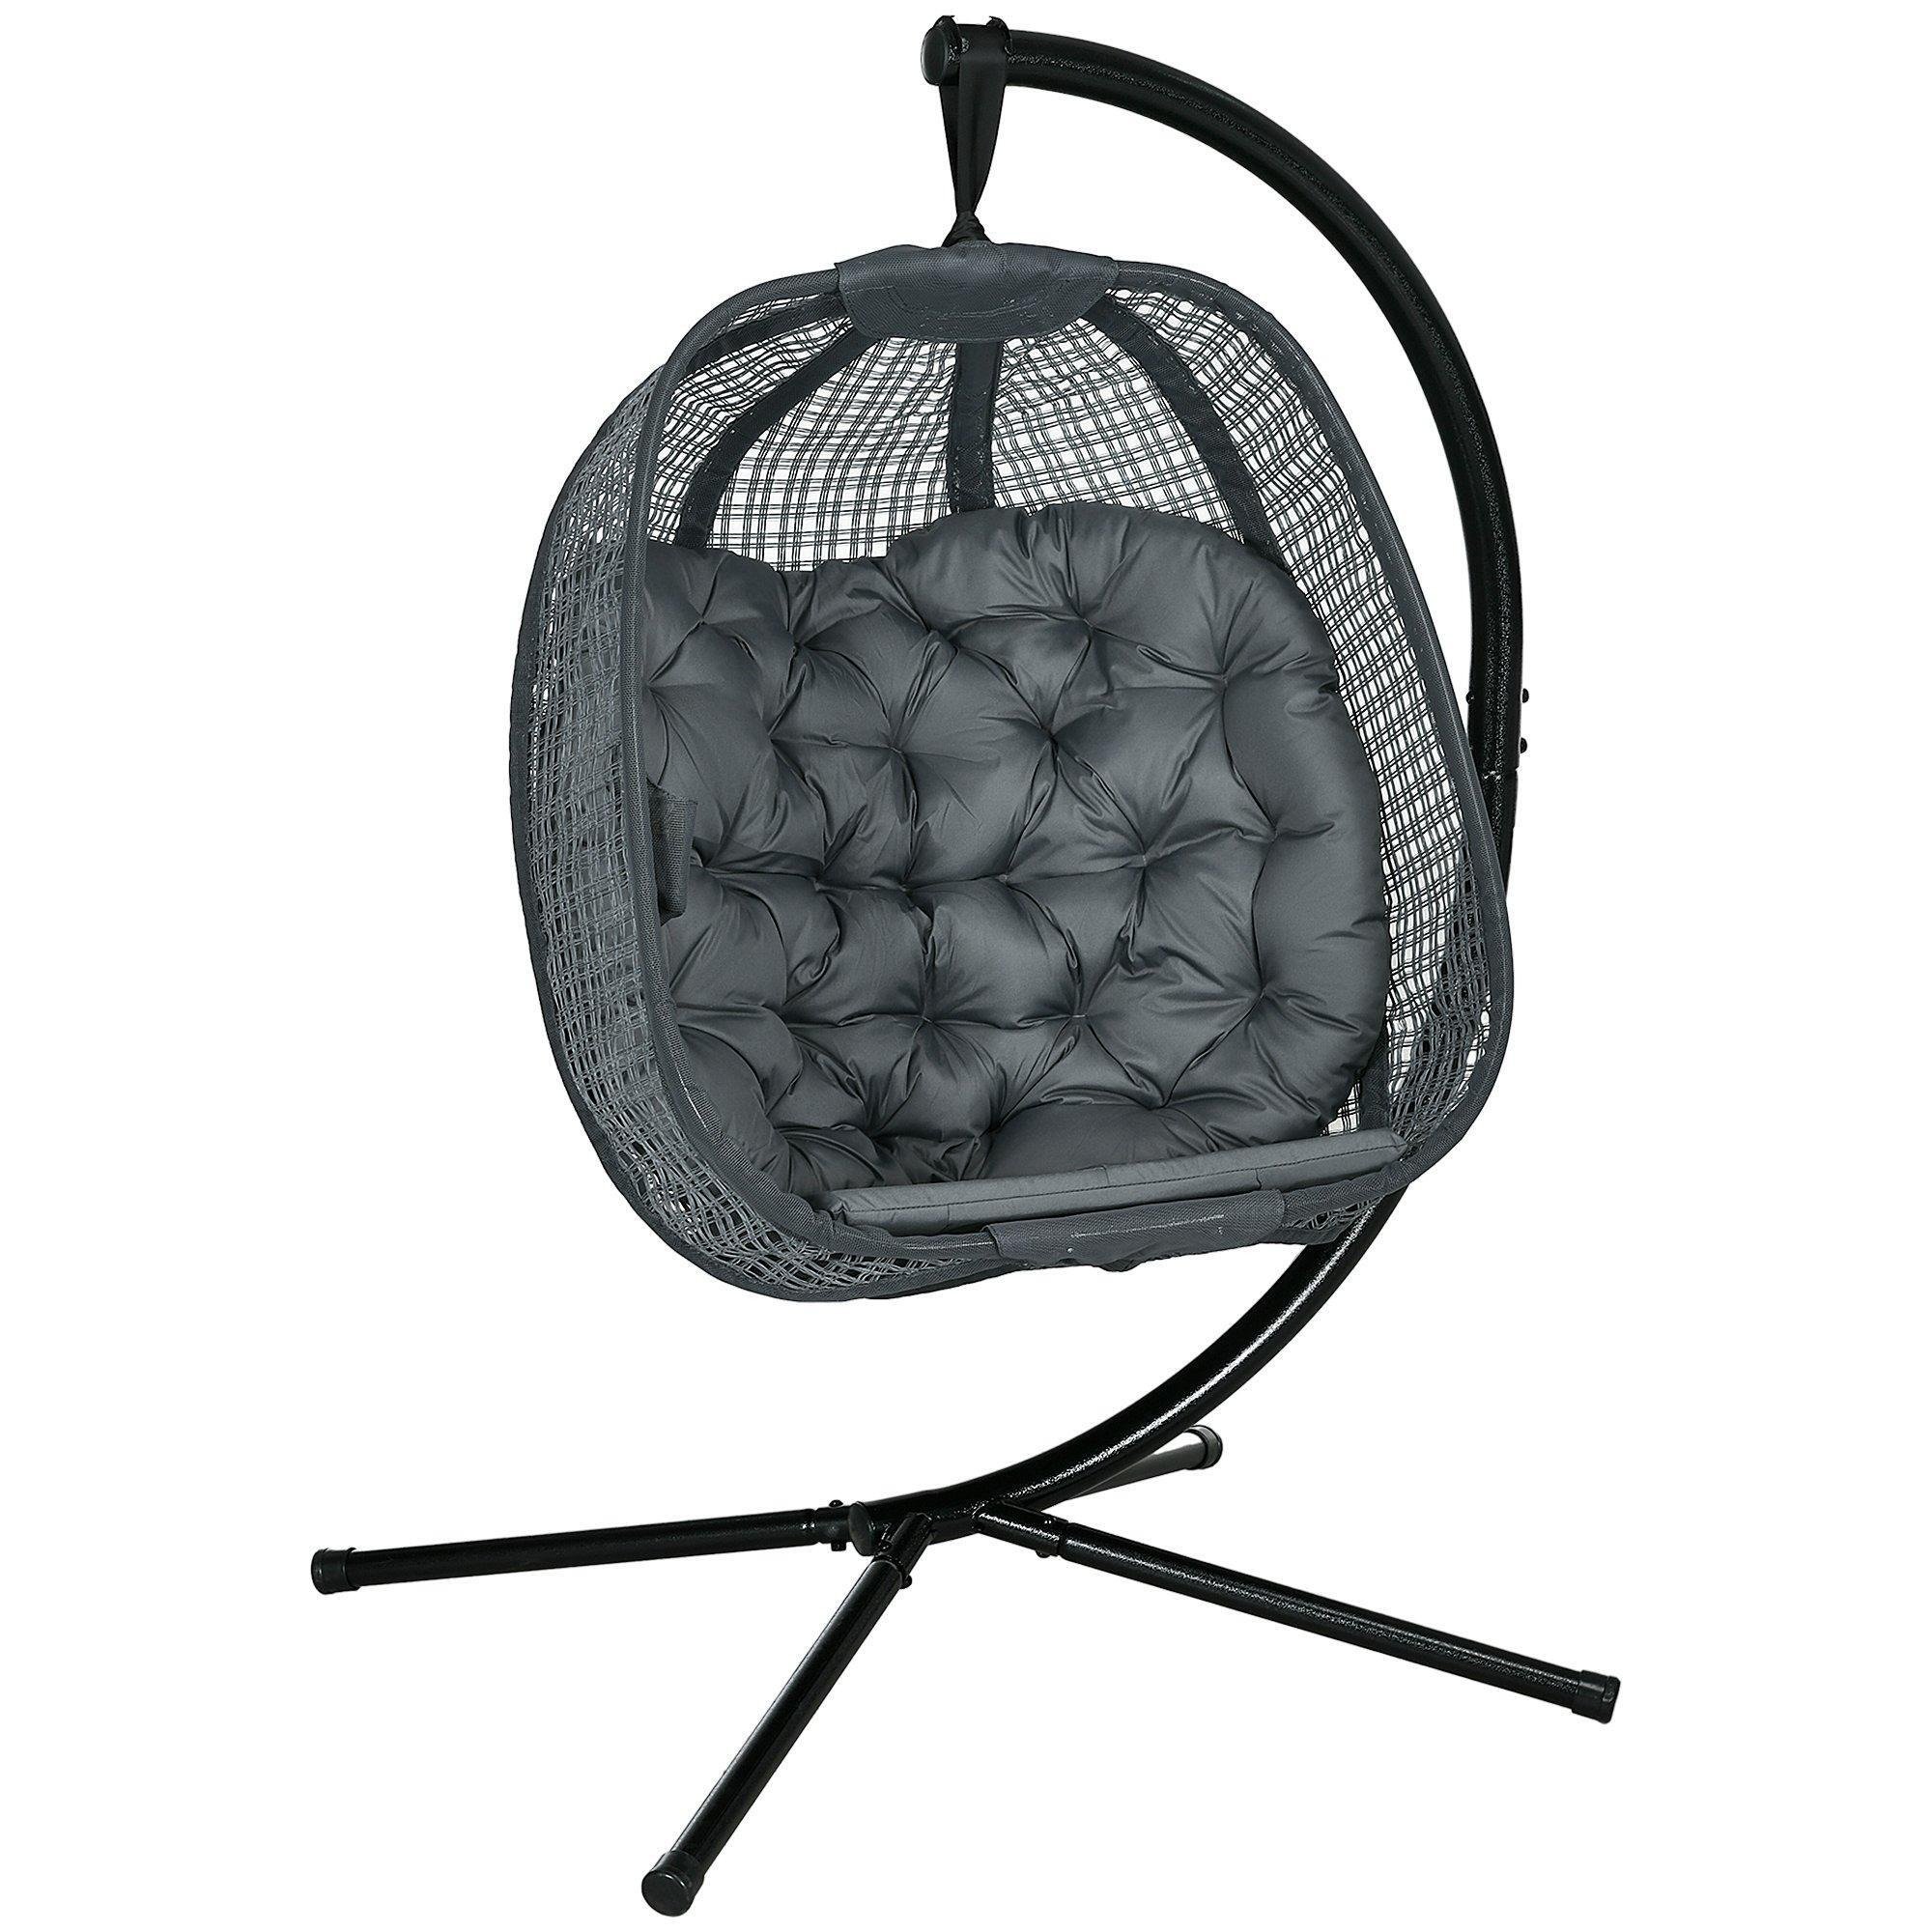 Hanging Swing Chair with Thick Cushion, Patio Hanging Chair, Dark Grey - image 1